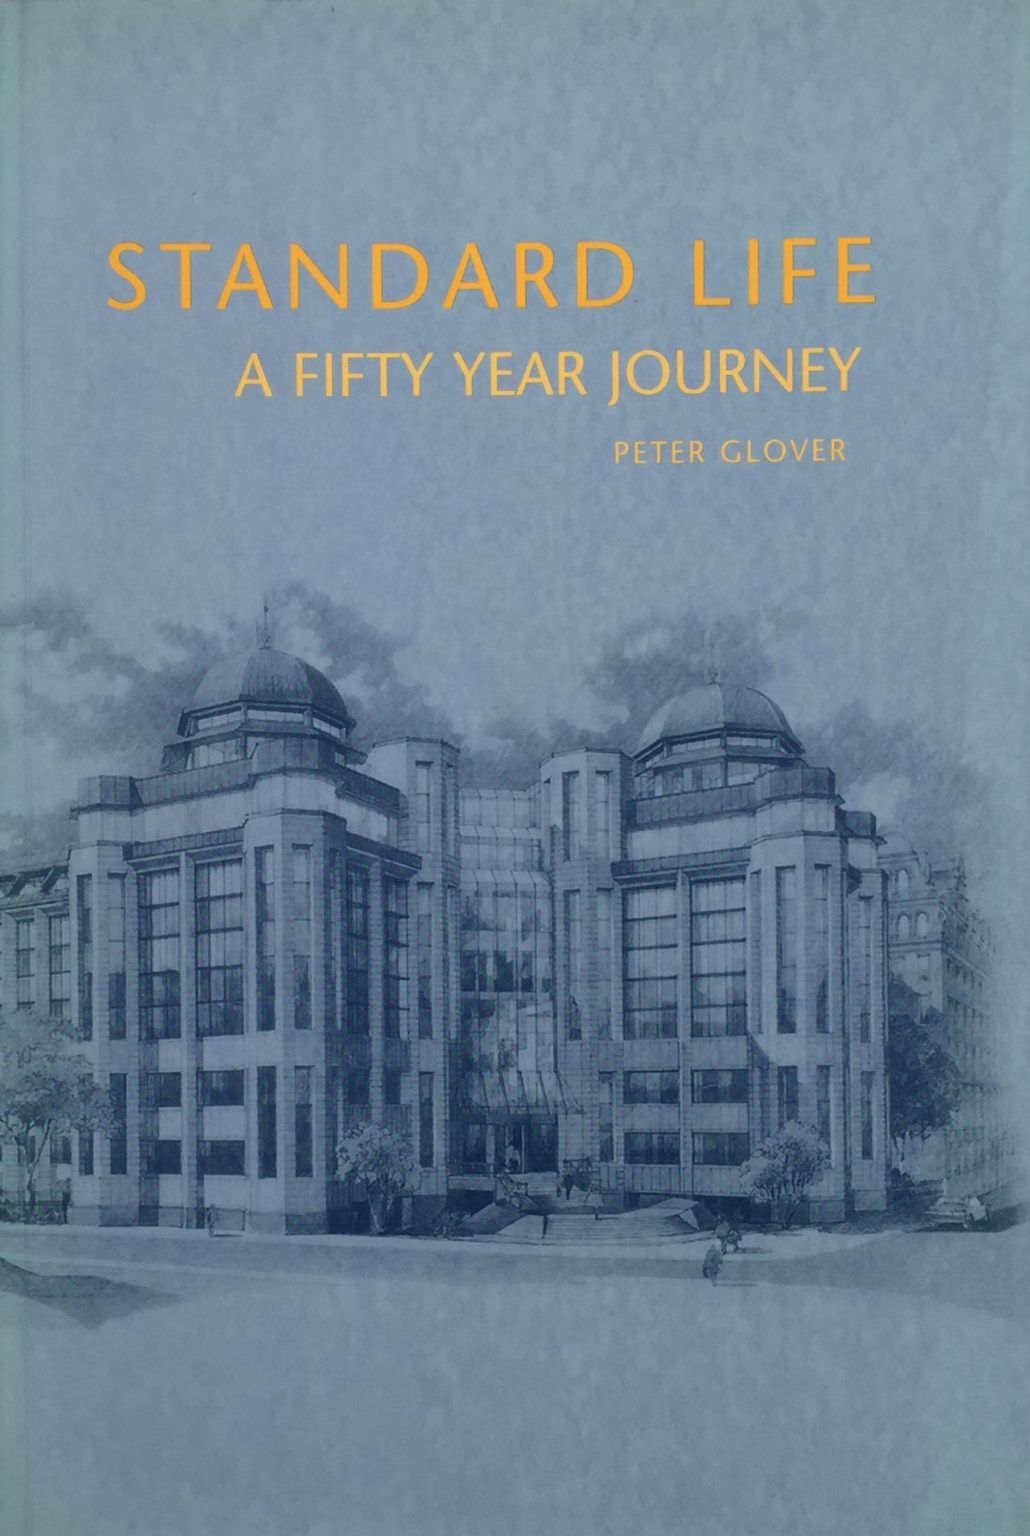 STANDARD LIFE: A Fifty Year Journey